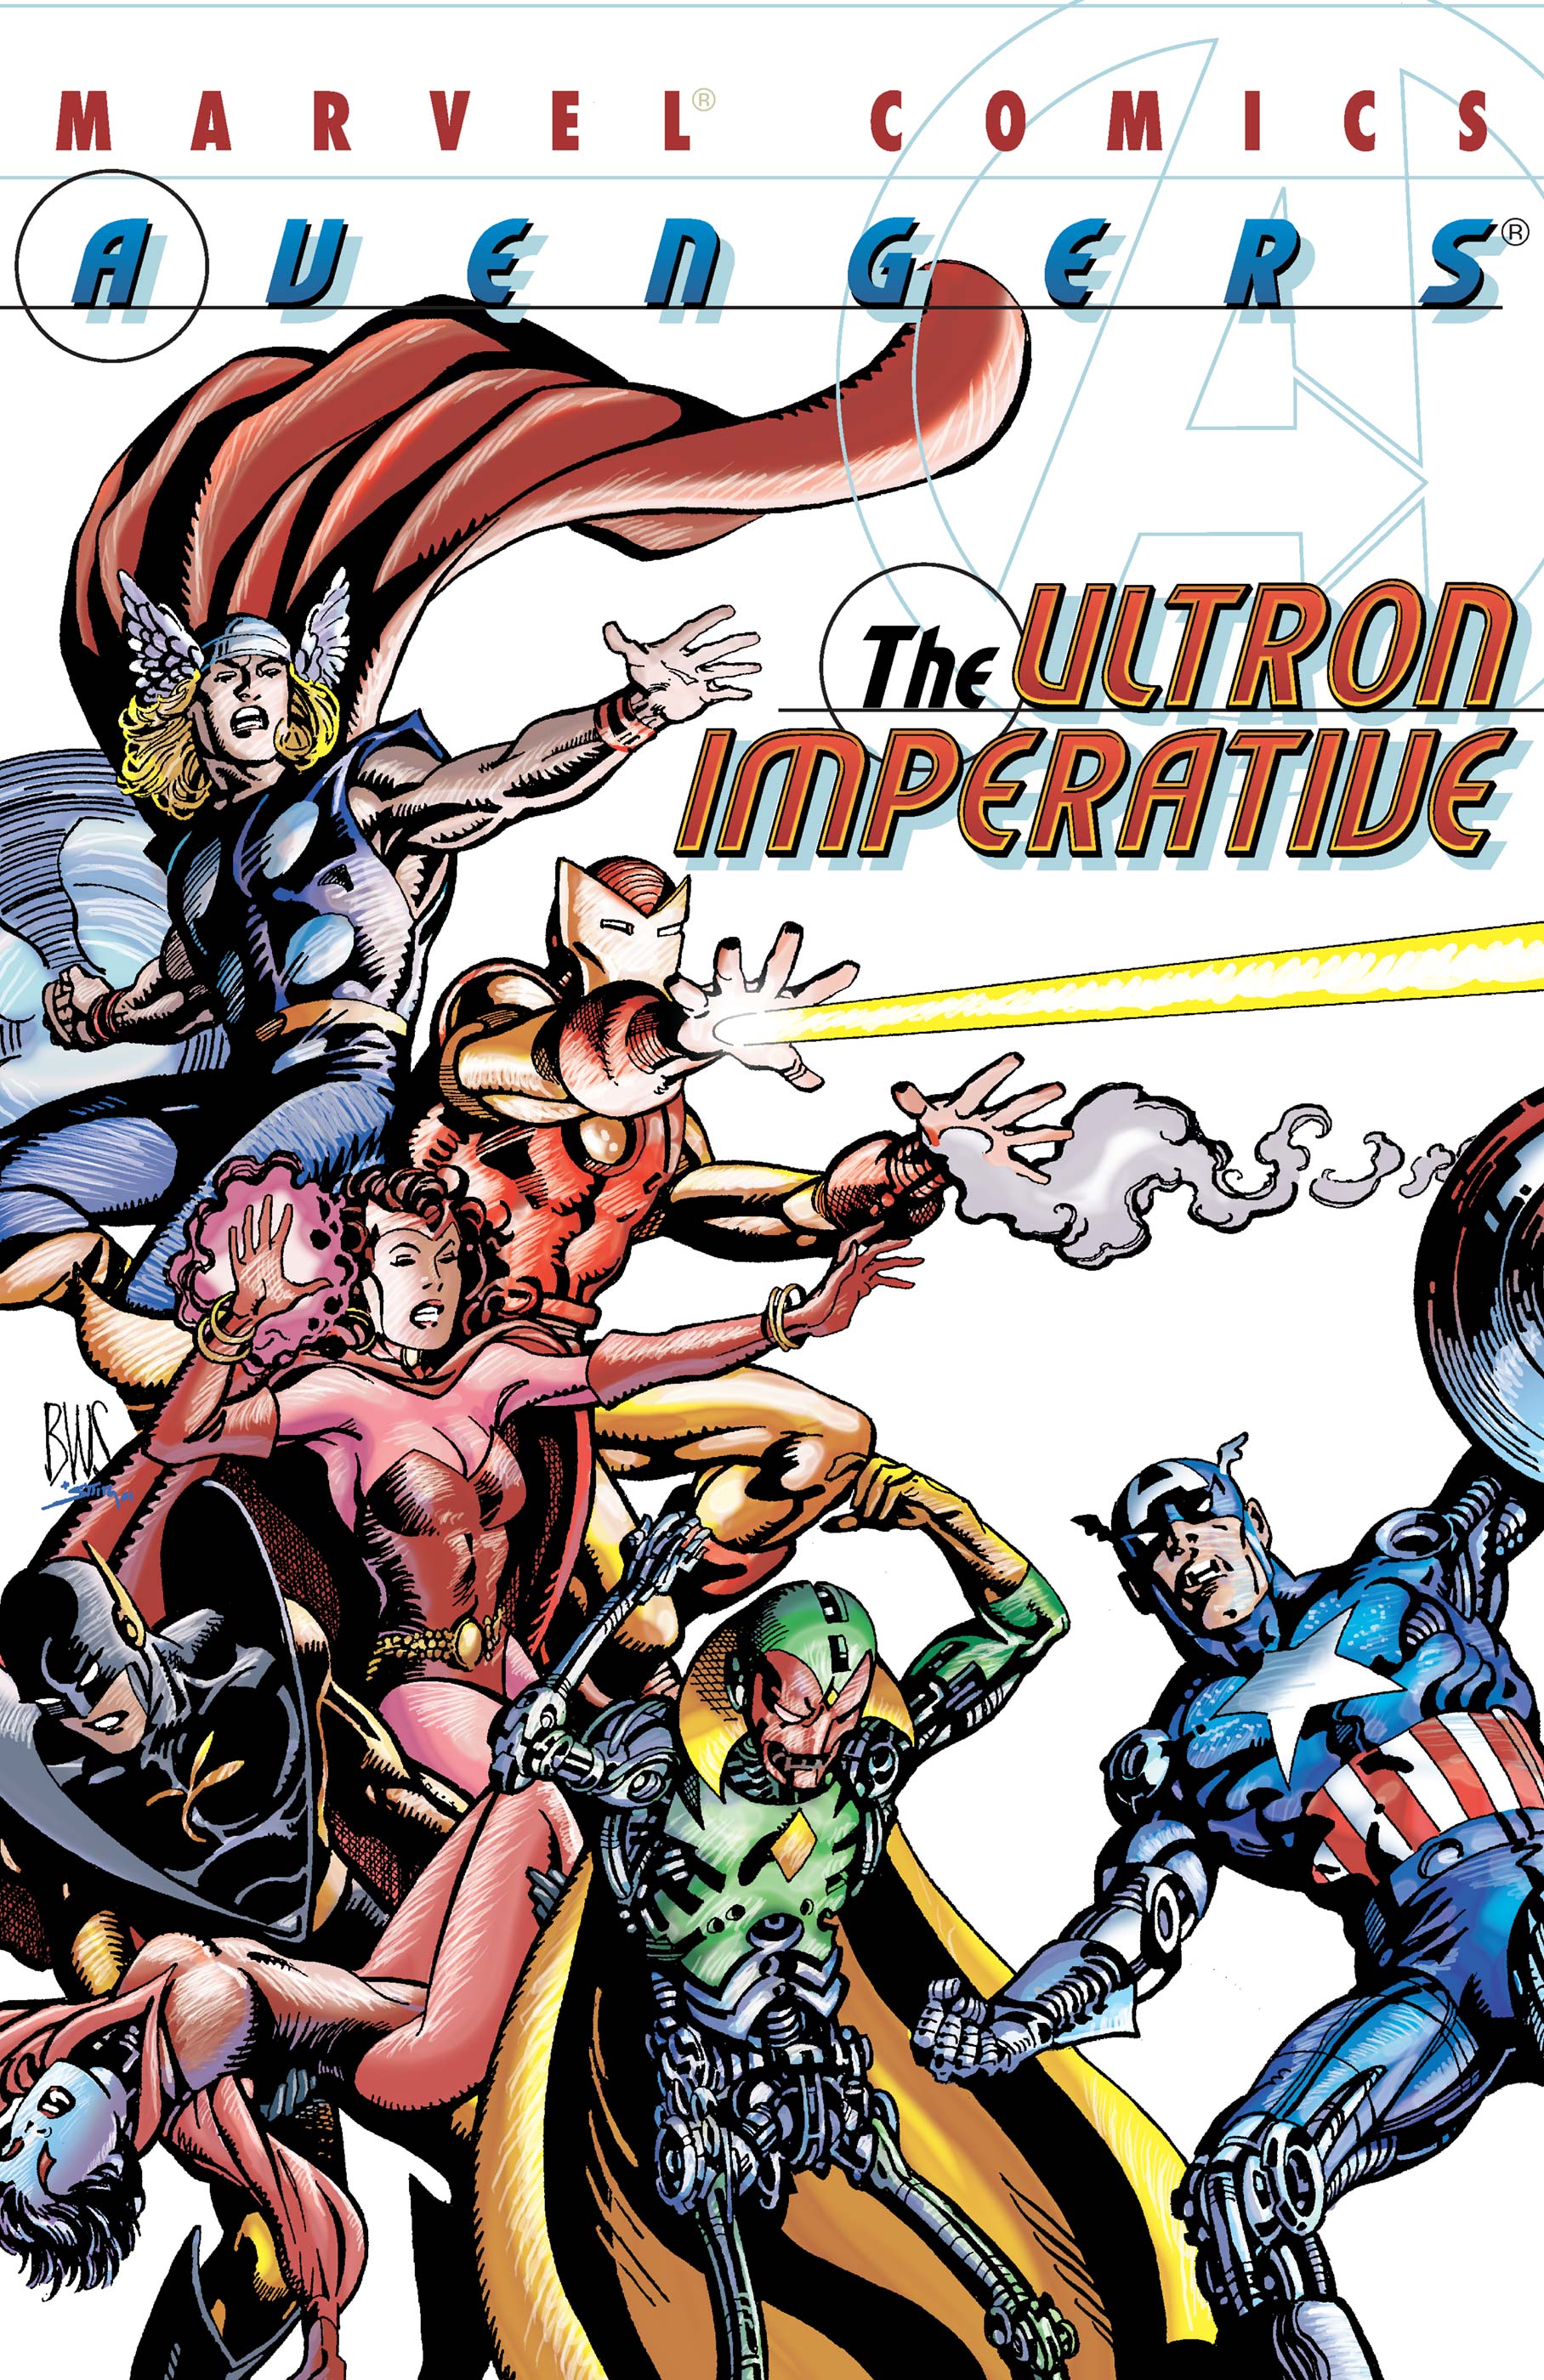 Avengers: The Ultron Imperative (2001) #1